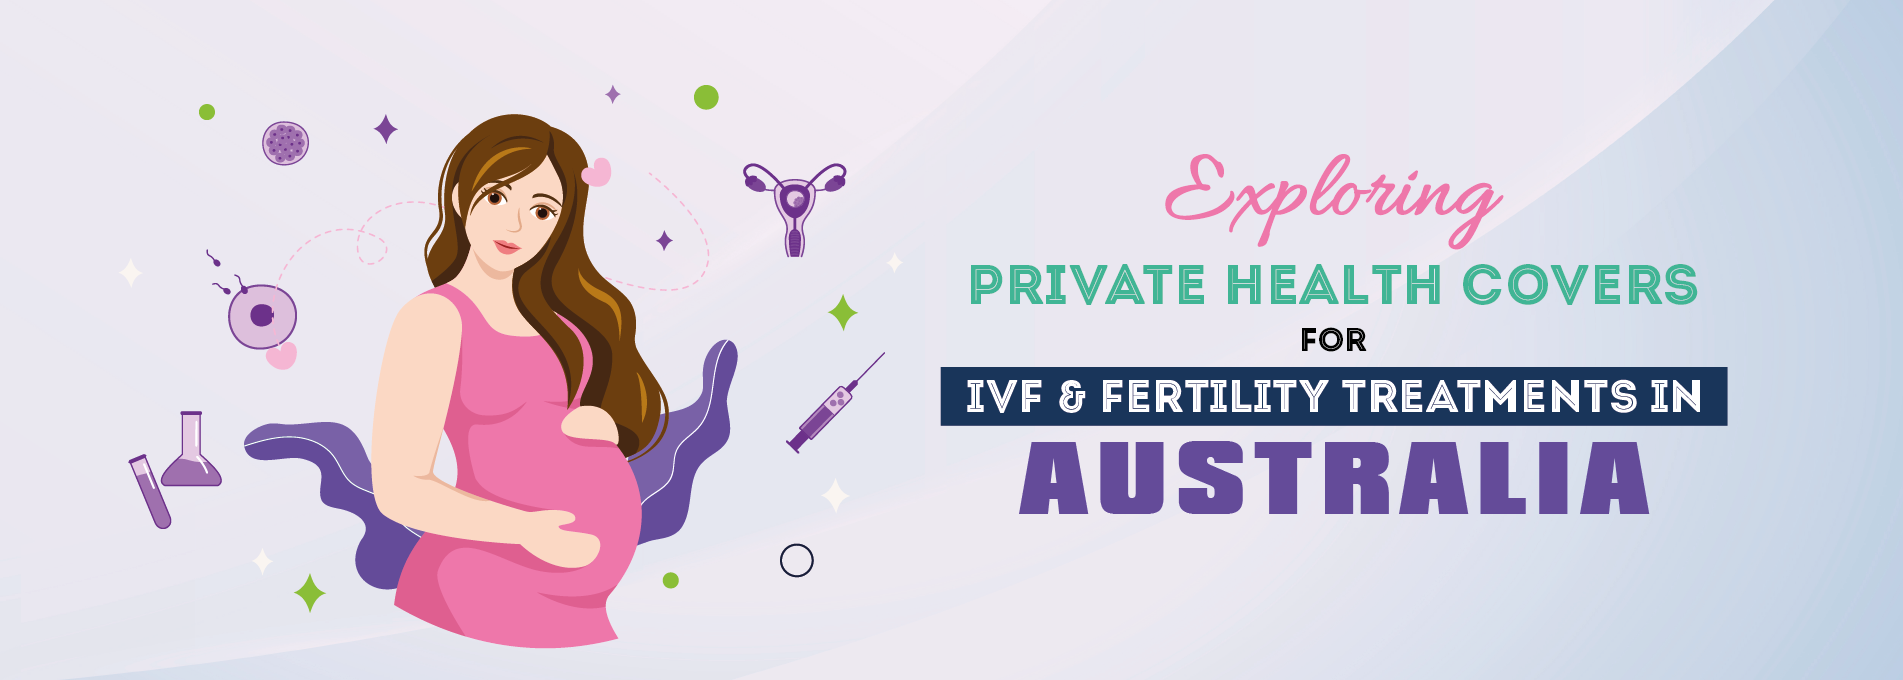 Exploring Private Health Covers for IVF and Fertility Treatments in Australia